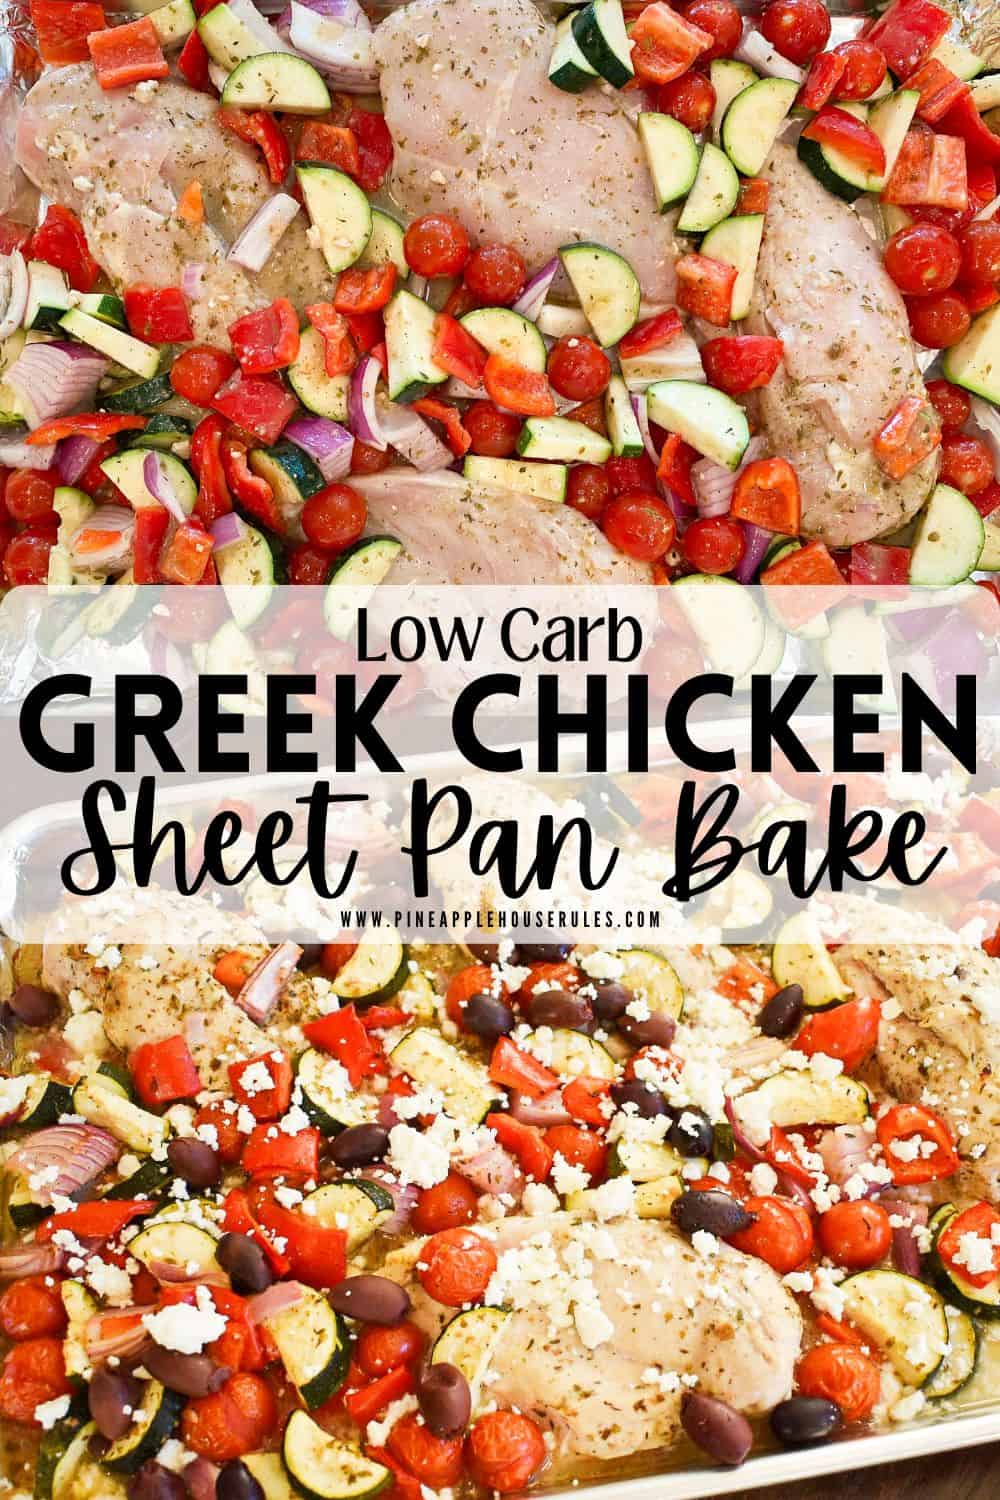 This Sheet Pan Greek Chicken is an easy dinner recipe that's low carb, keto friendly, and a hit with the whole family! It's full of flavor and protein! Sheet Pan Greek Chicken | Greek Chicken Sheet Pan | Greek Chicken Sheet Pan Bake | Sheet Pan Meals | Low Carb Recipes | Keto Recpies | Sheet Pan Greek Chicken and Veggies | Low Carb Meals | Low Carb Dinner | Low Carb Dinner Recipes | Greek Chicken | Greek Chicken Recipes | Easy Dinner Recipes Healthy | Easy Dinner Recipes | Dinner Ideas